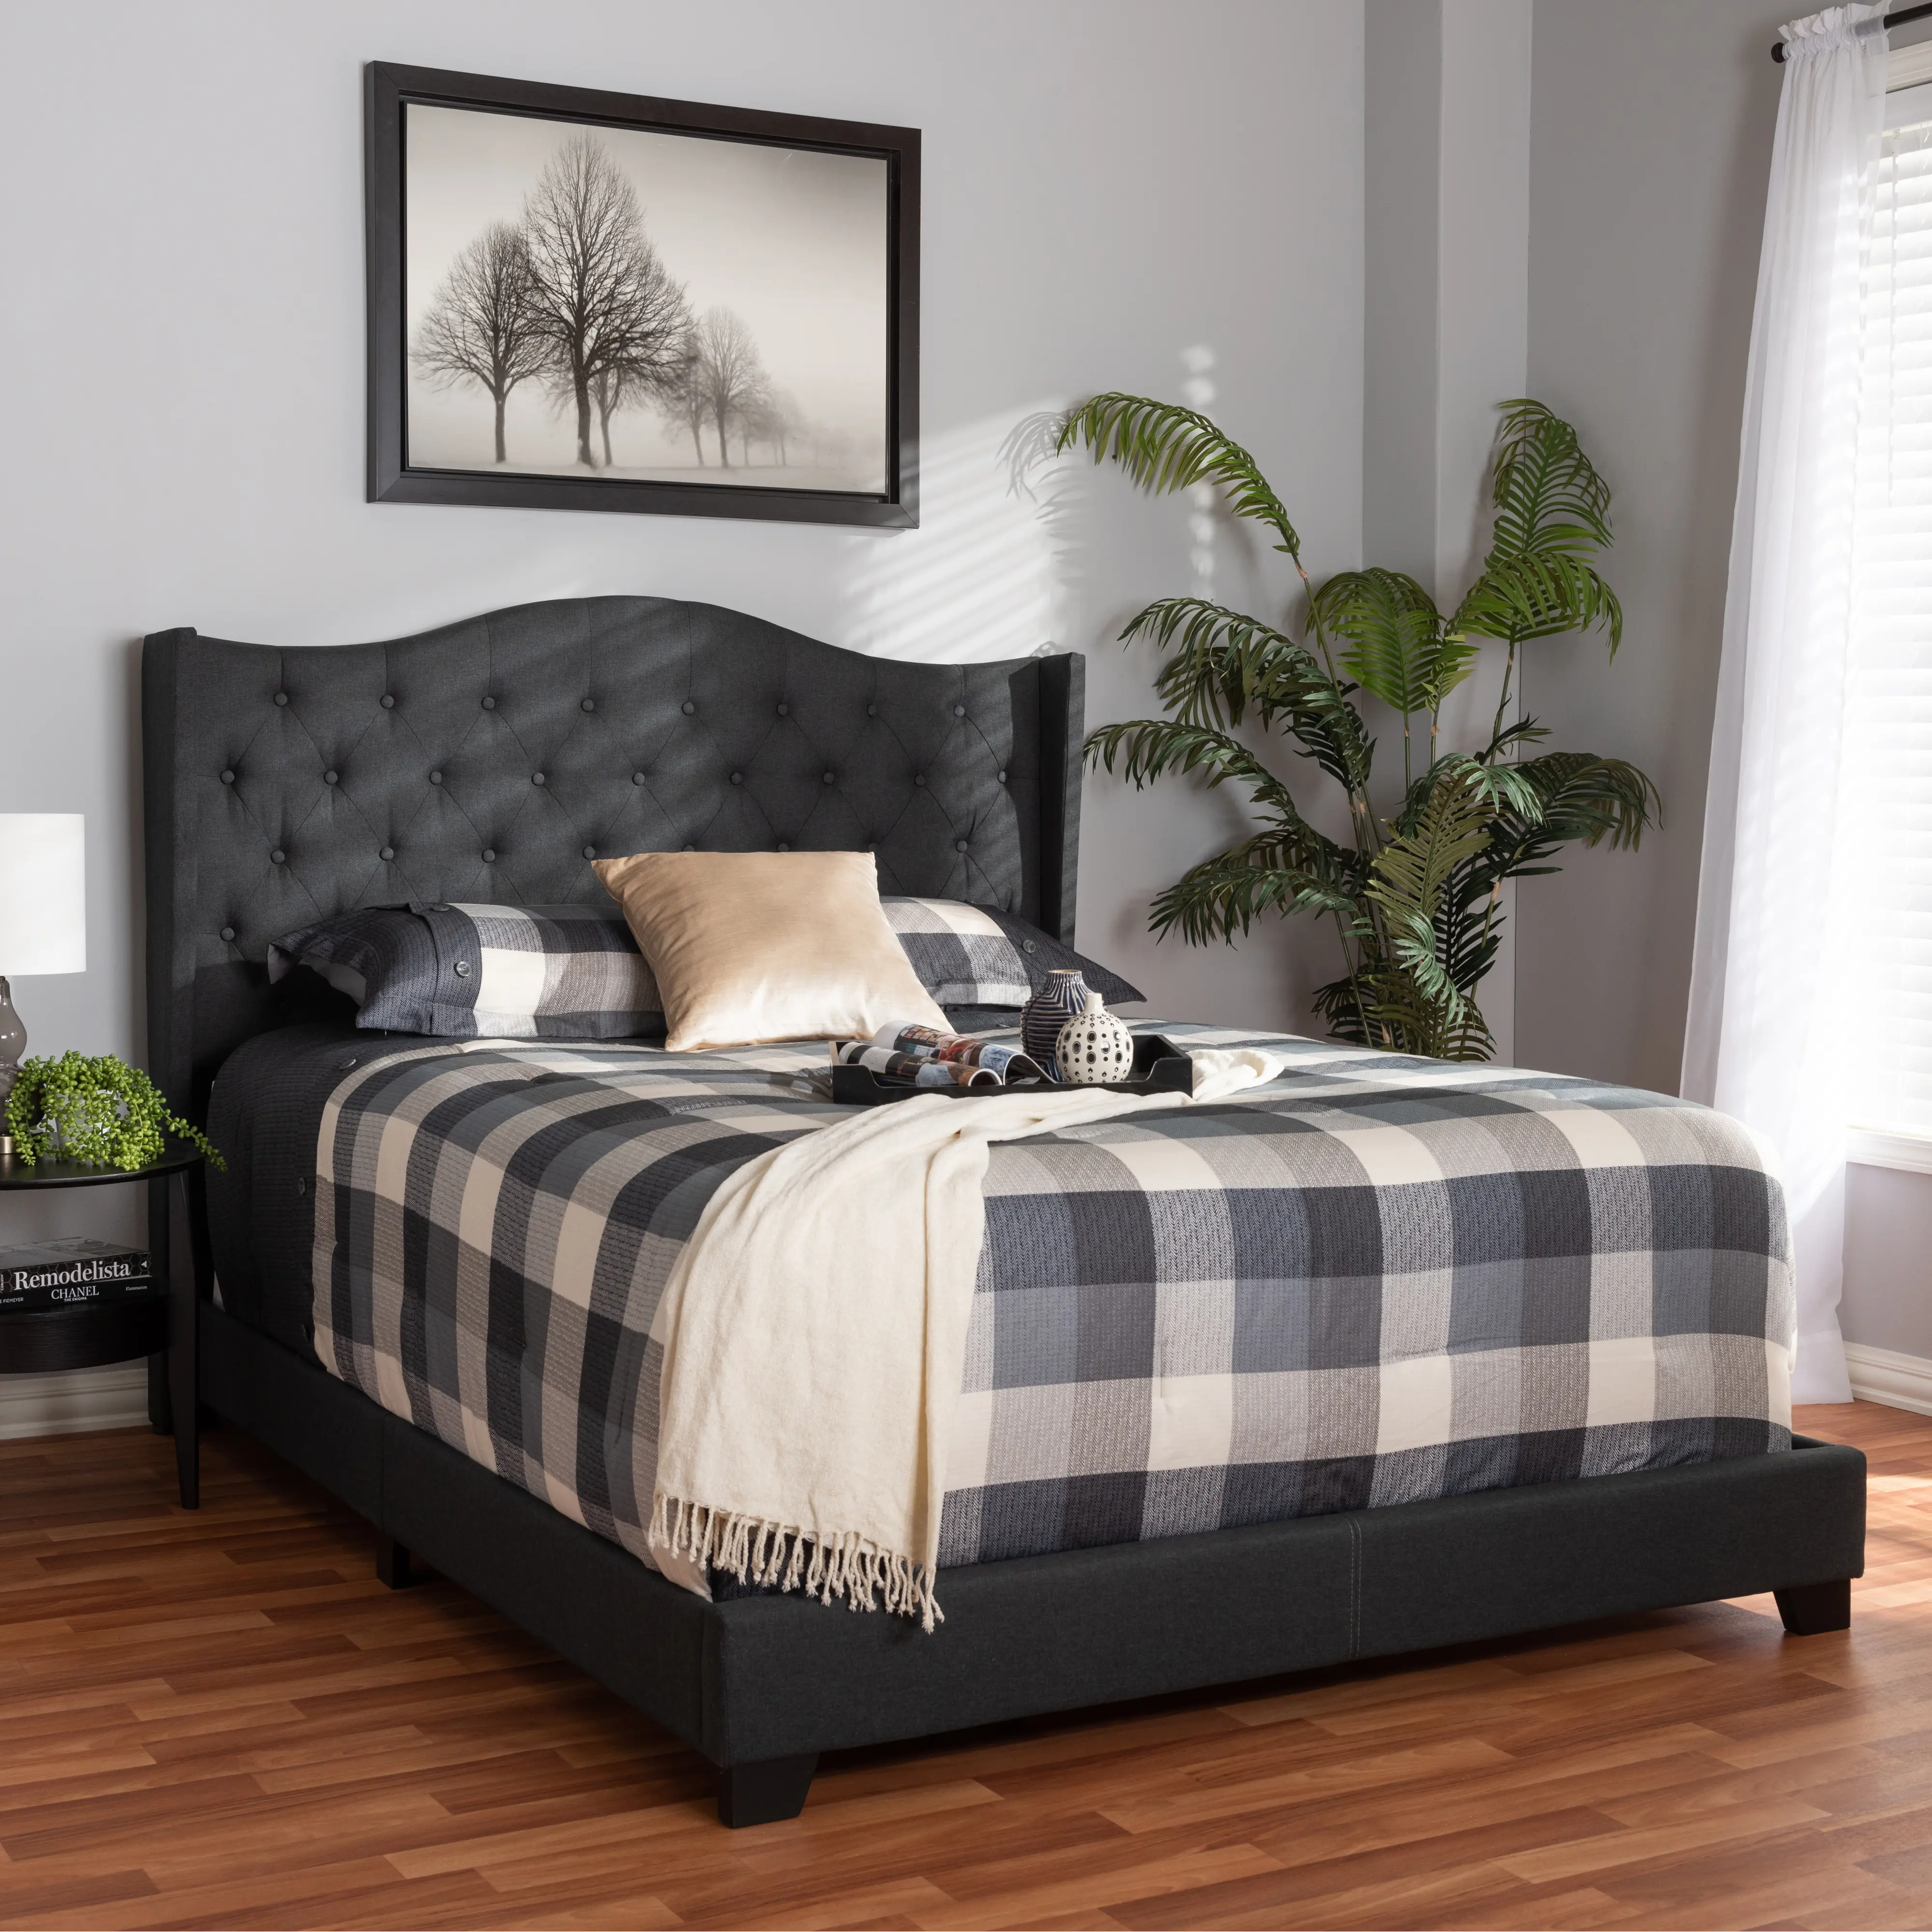 149-8933-RCW Contemporary Charcoal Gray Upholstered Queen Bed - sku 149-8933-RCW